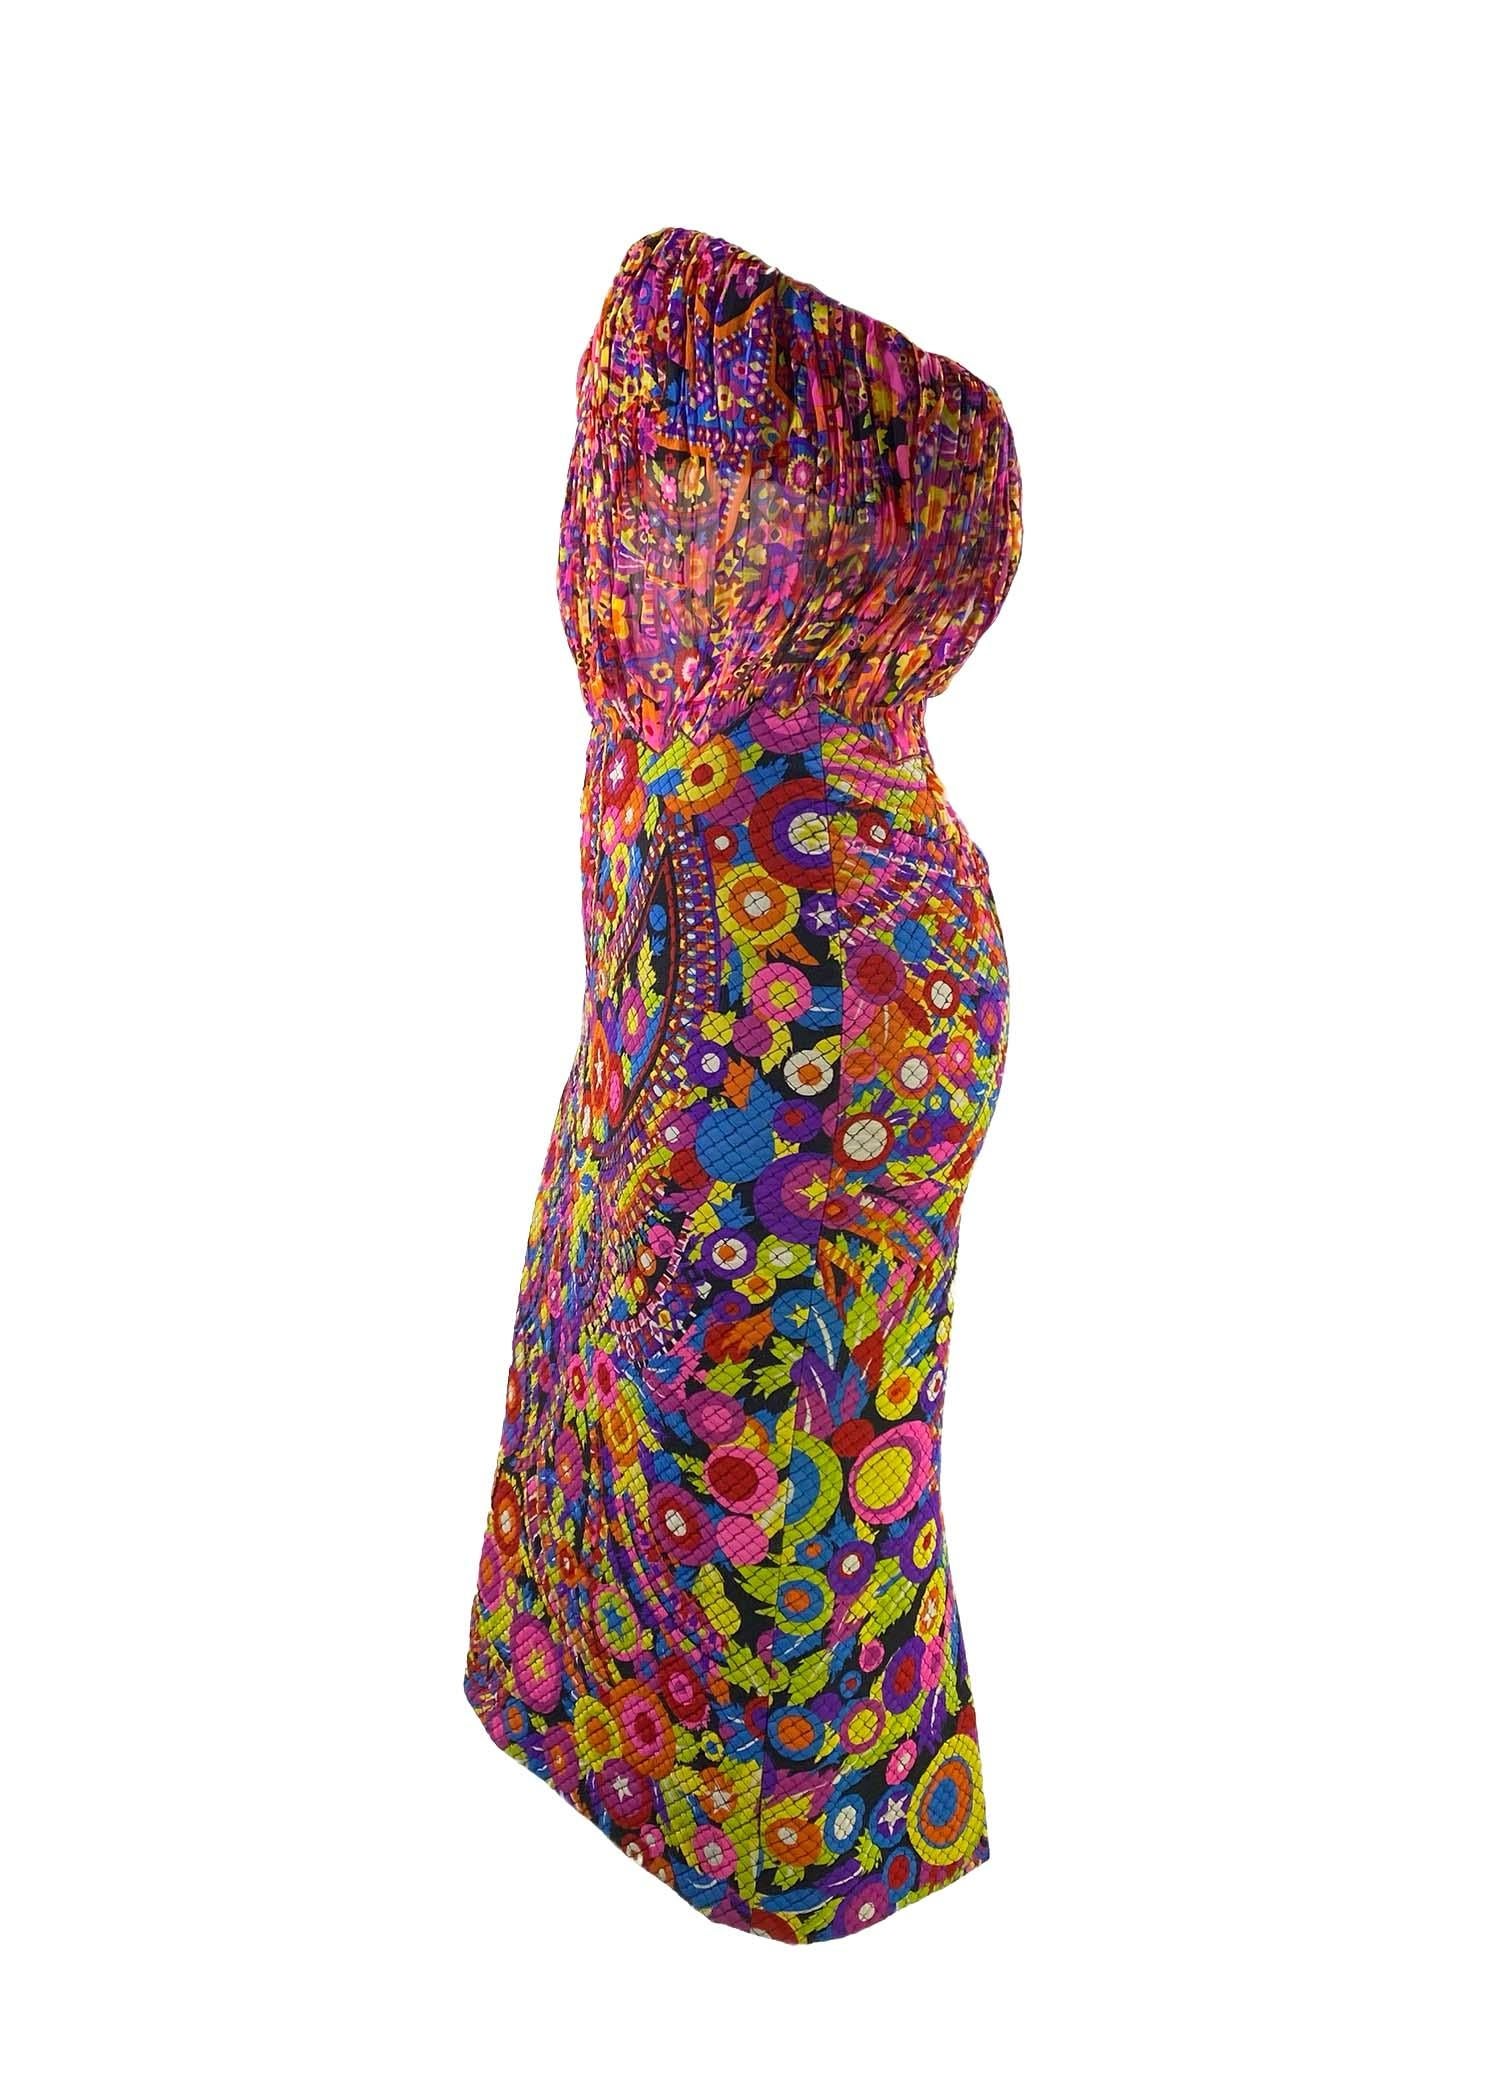 Brown F/W 2002 Gianni Versace by Donatella Psychedelic Print Sheer Strapless Dress For Sale